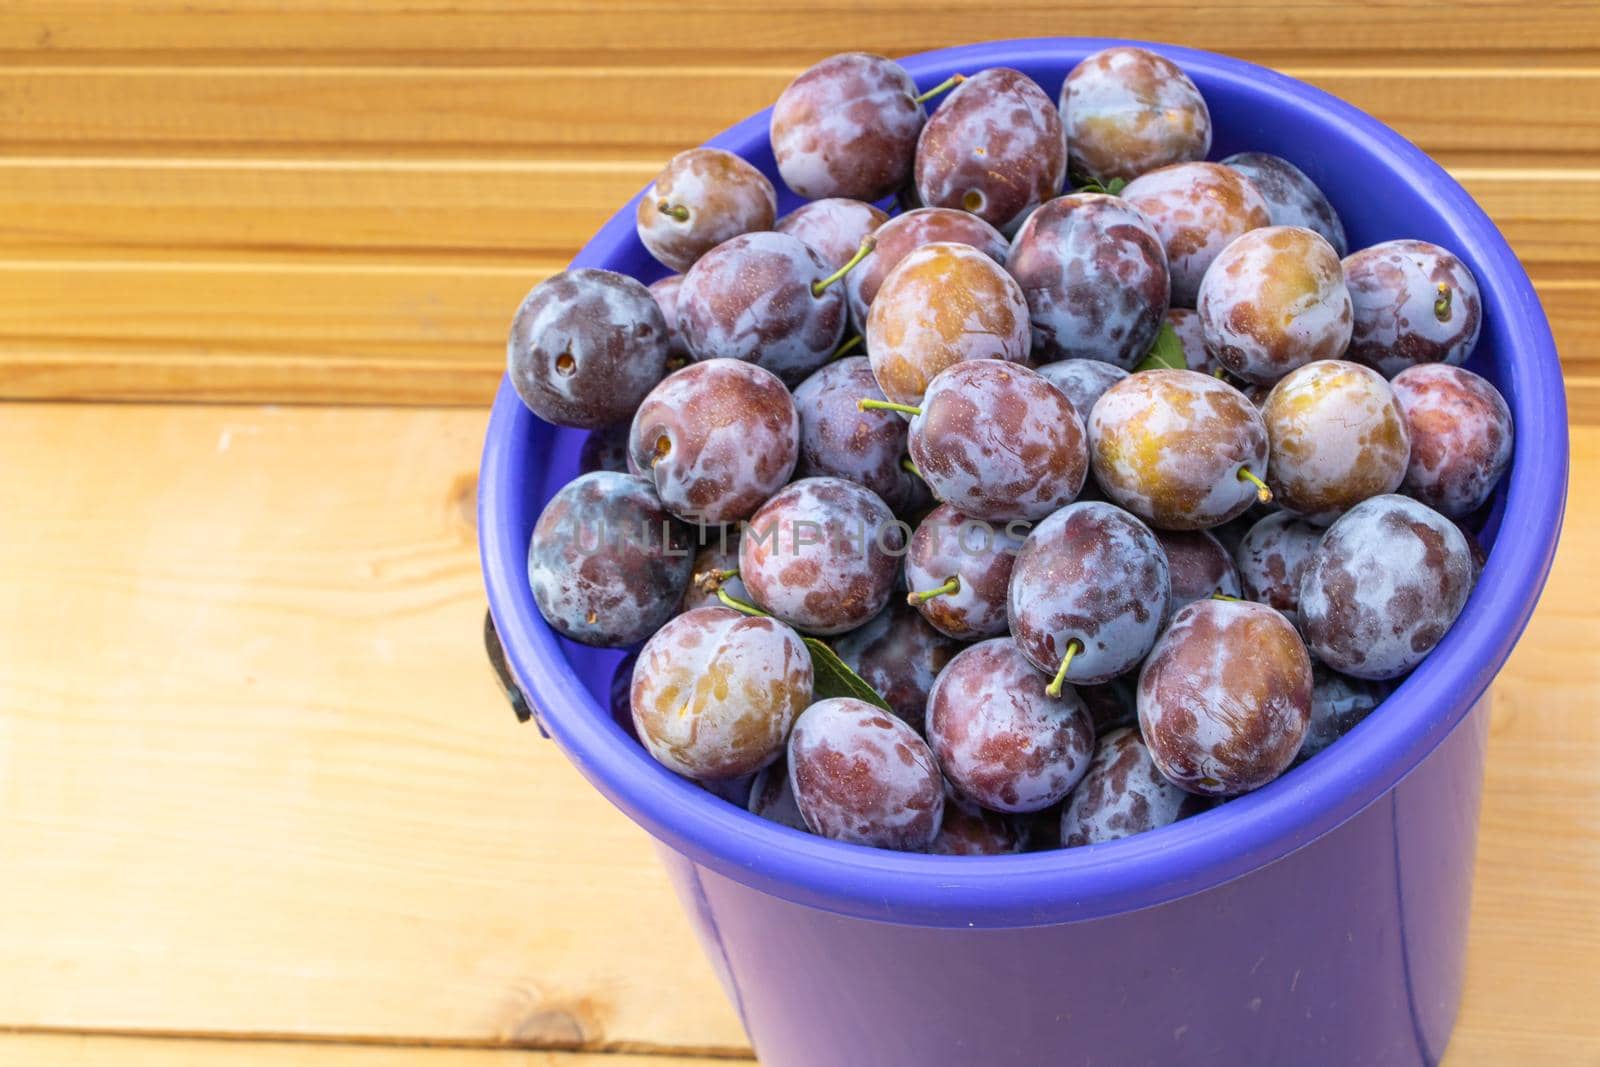 A bucket full of fresh plums on wooden background close up.